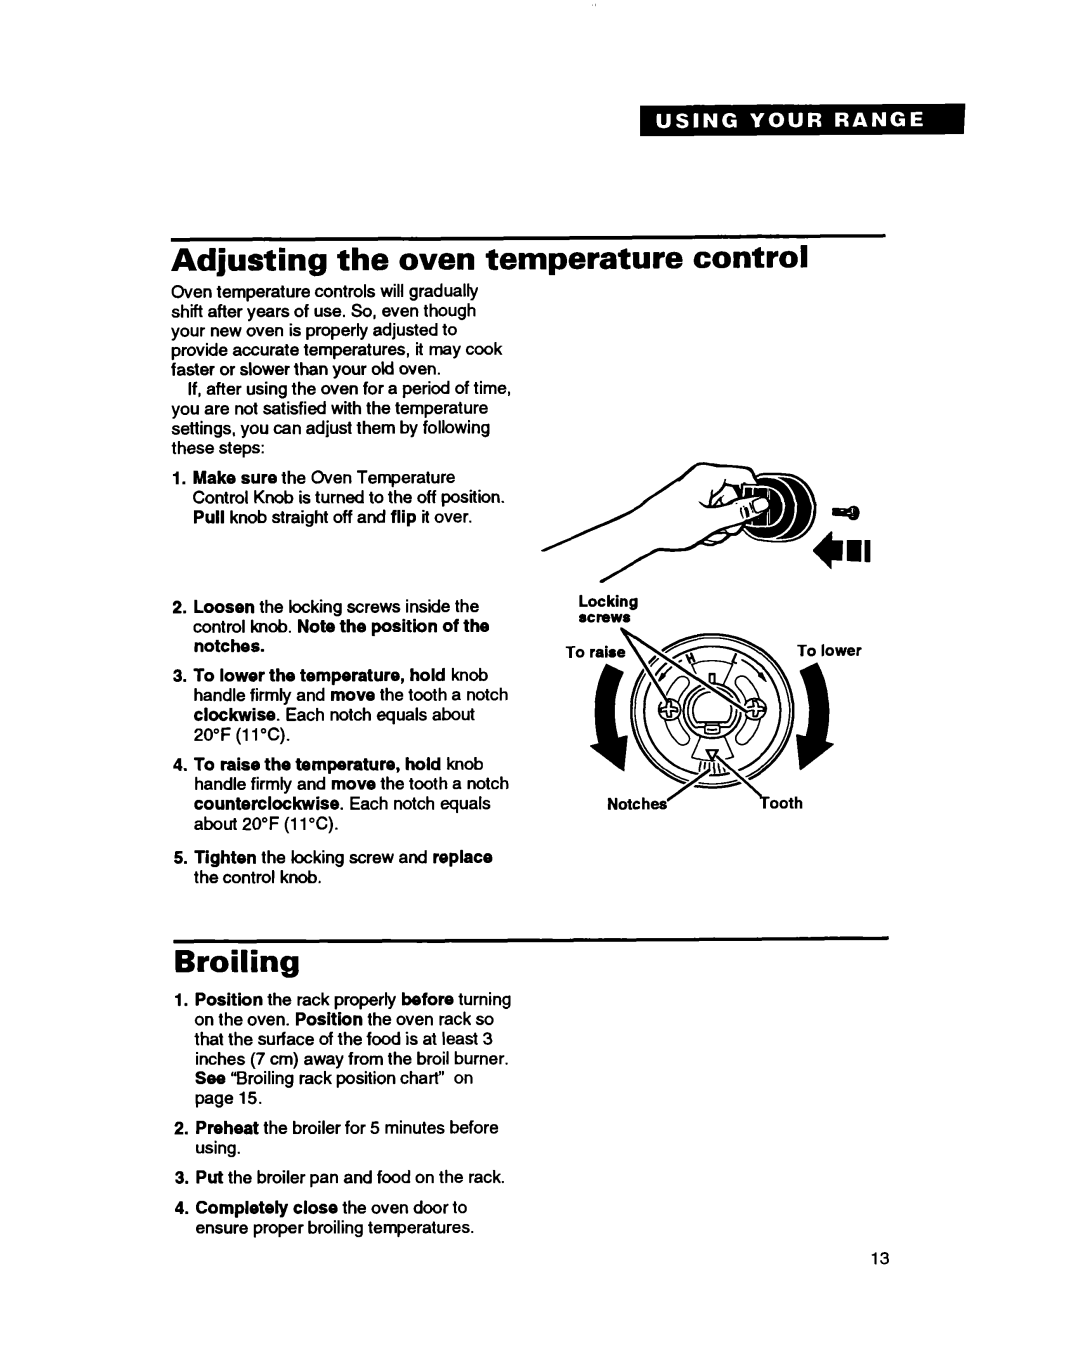 Whirlpool TGR88W2B manual Adjusting the oven temperature control, Broiling, screws 